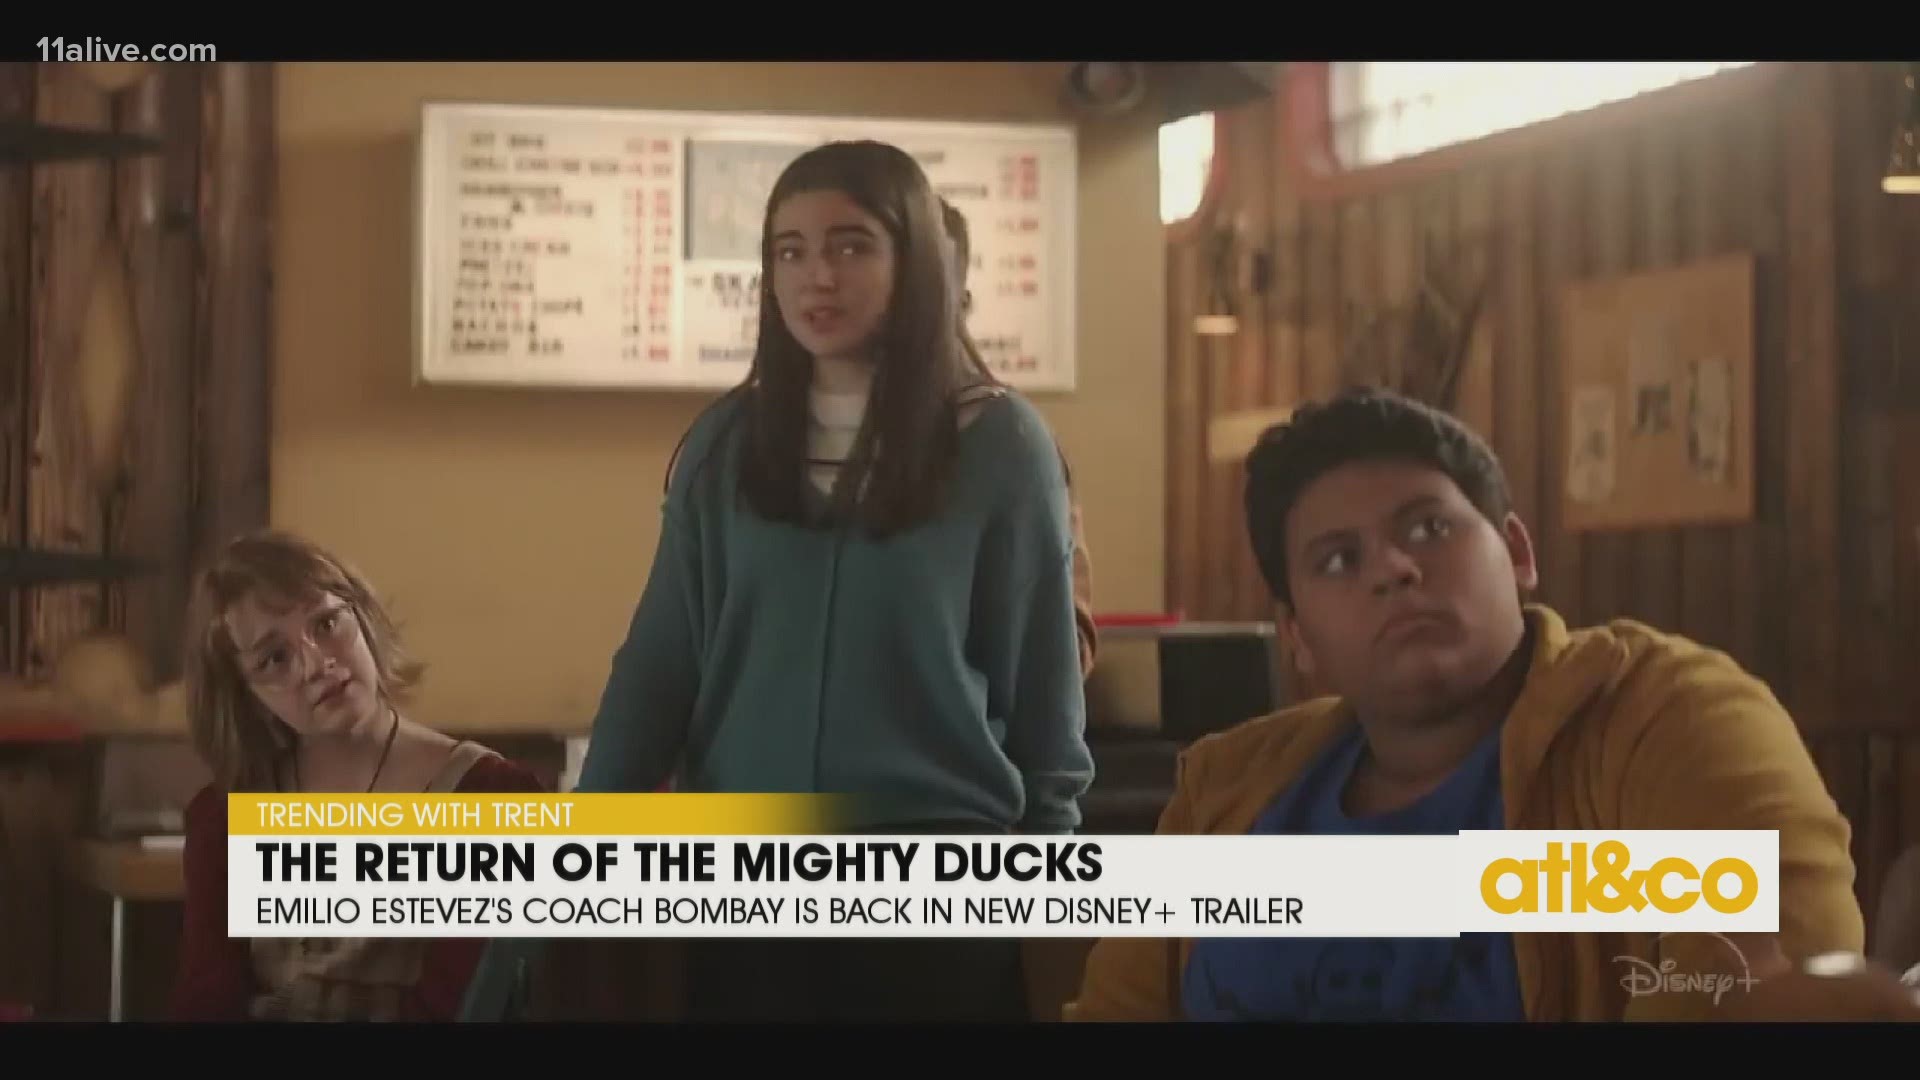 The Mighty Ducks (Disney+): What Does Family Look Like? 